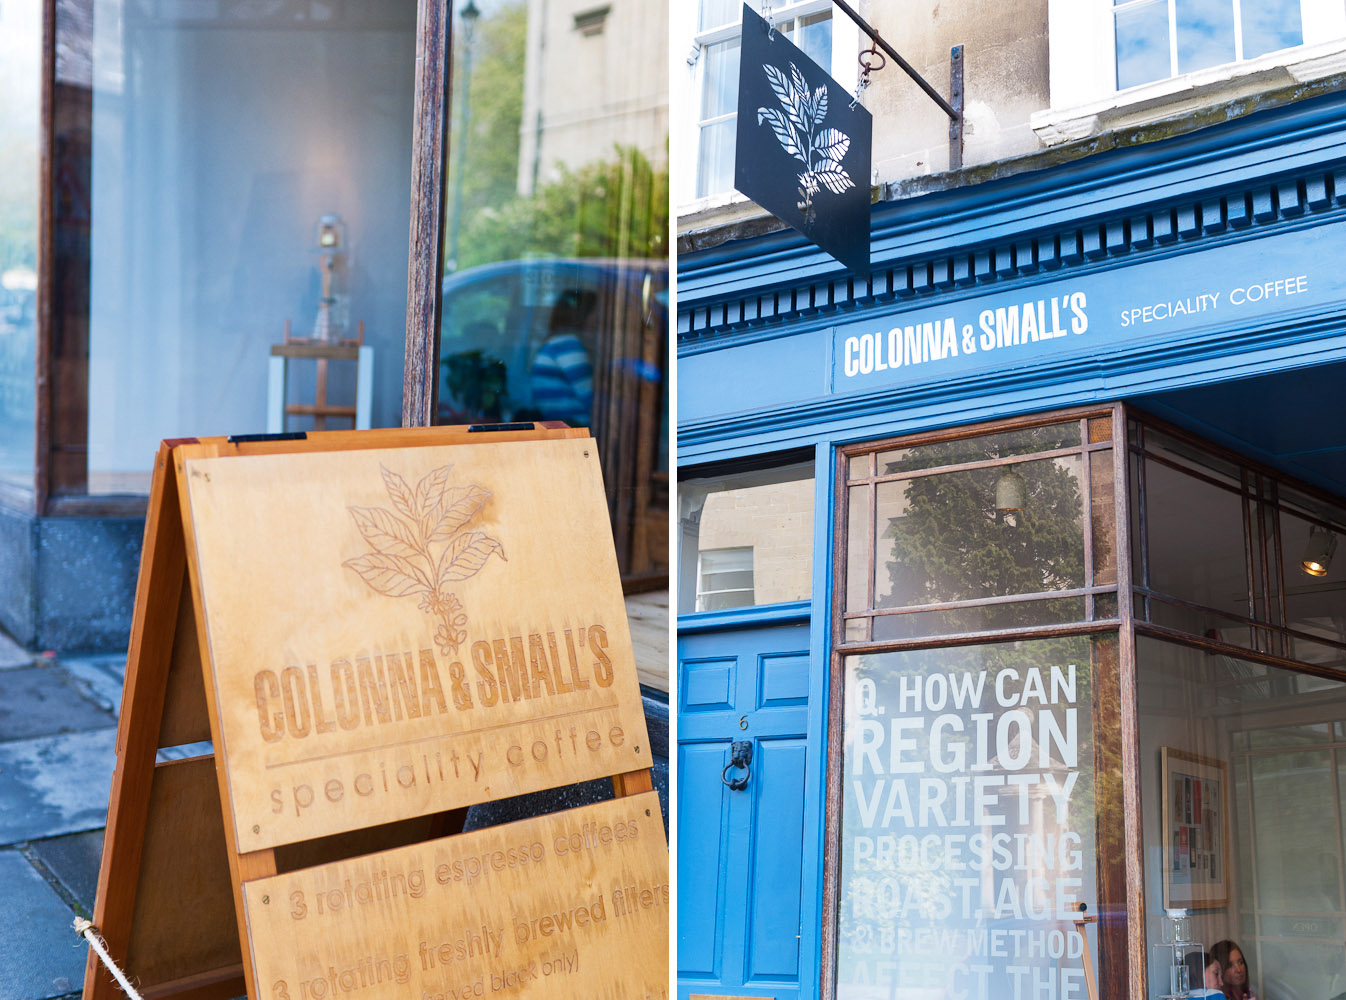 Colonna & Small's, Speciality Coffee shop in Bath (England)